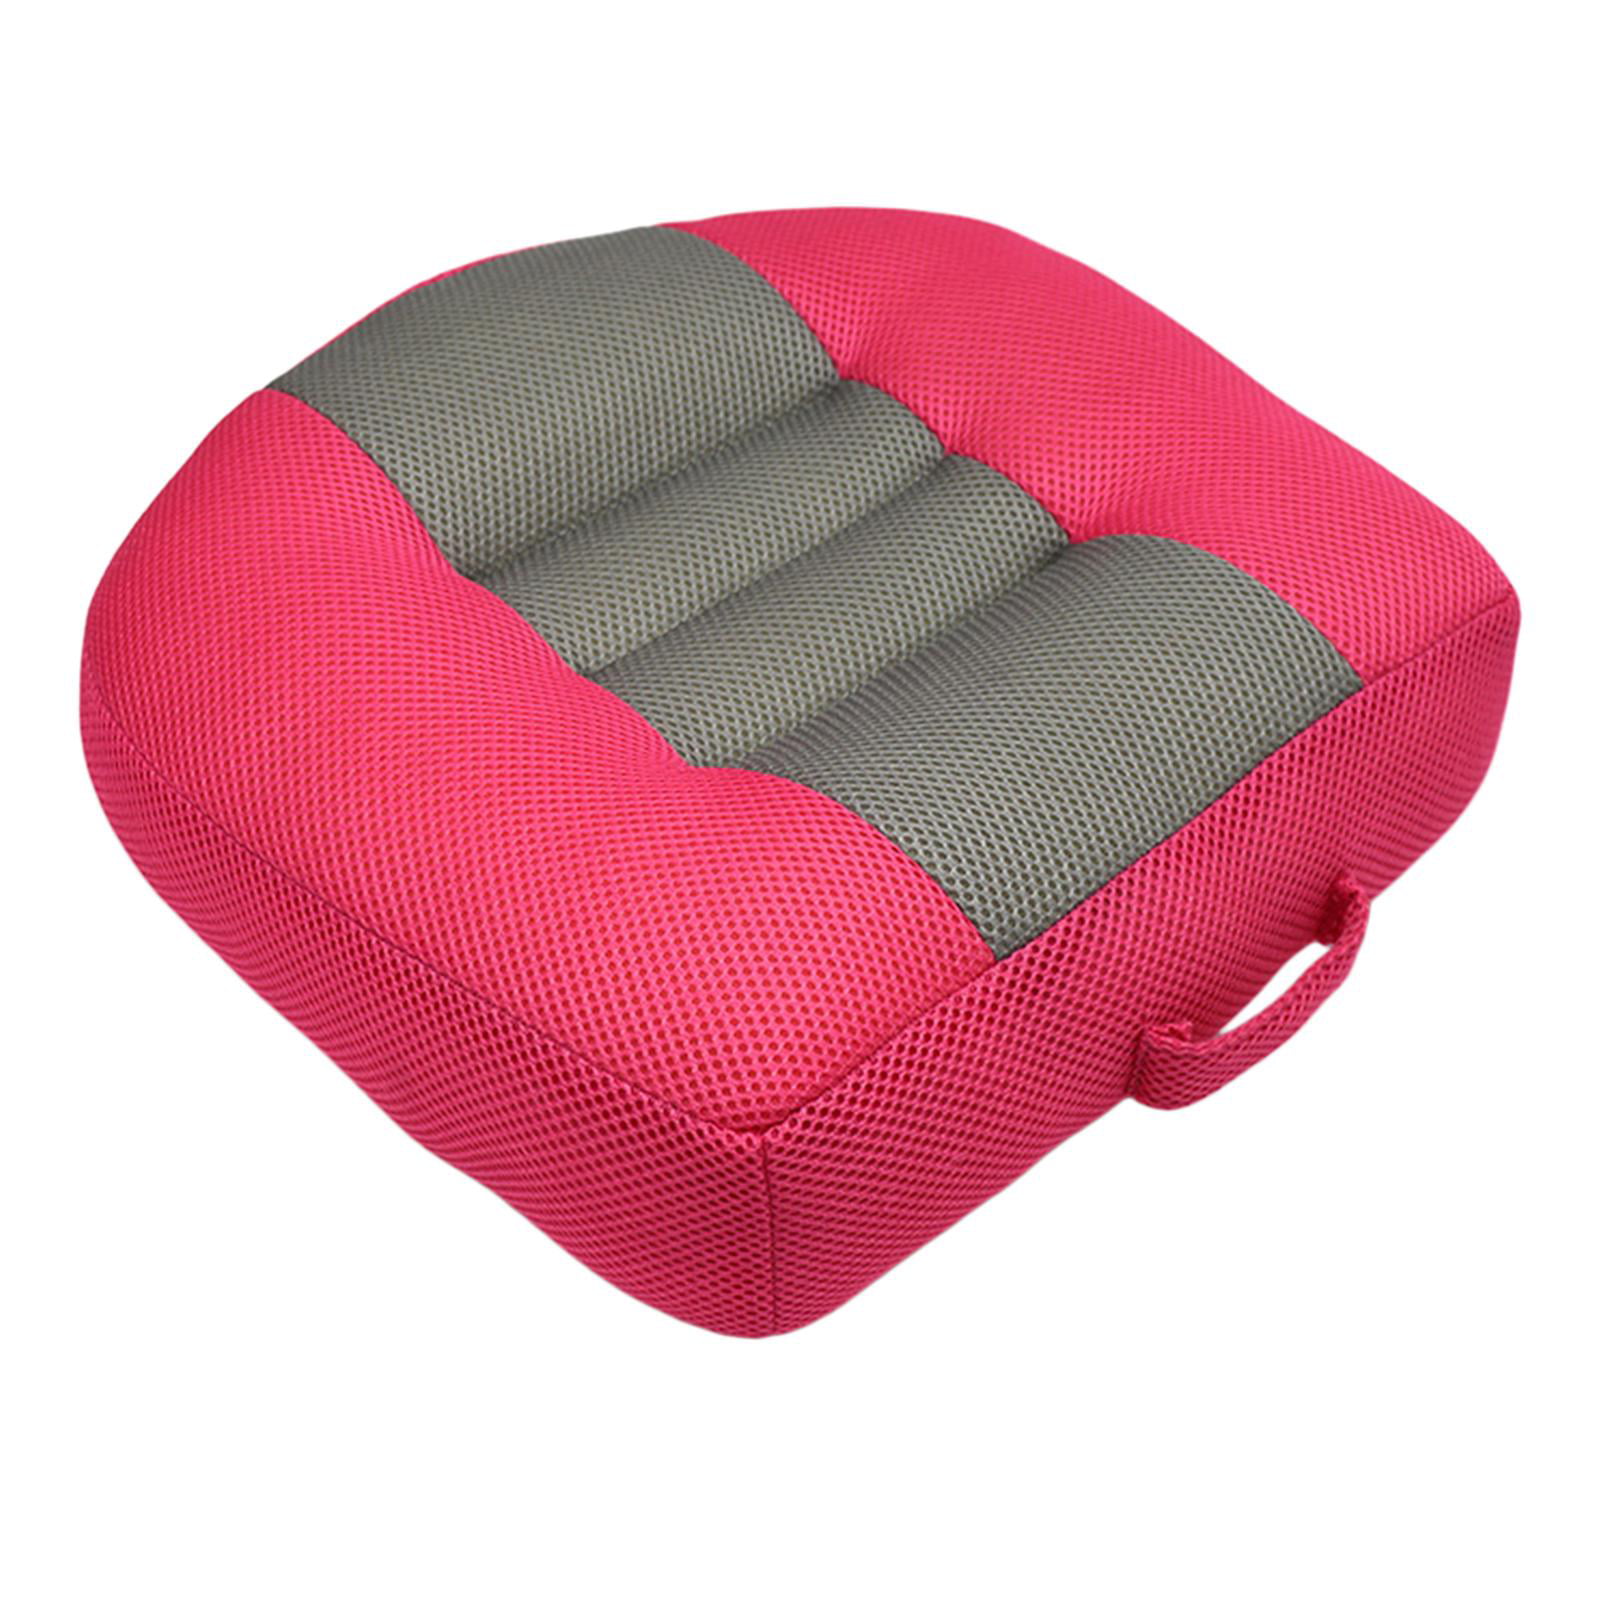 PRELGOSP Car Seat Cushion for Adult, Portable Car Booster Cushion, Soft  Non-Slip Car Seat Cushions for Driving, Ideal Boost Car Seat Pad for Short